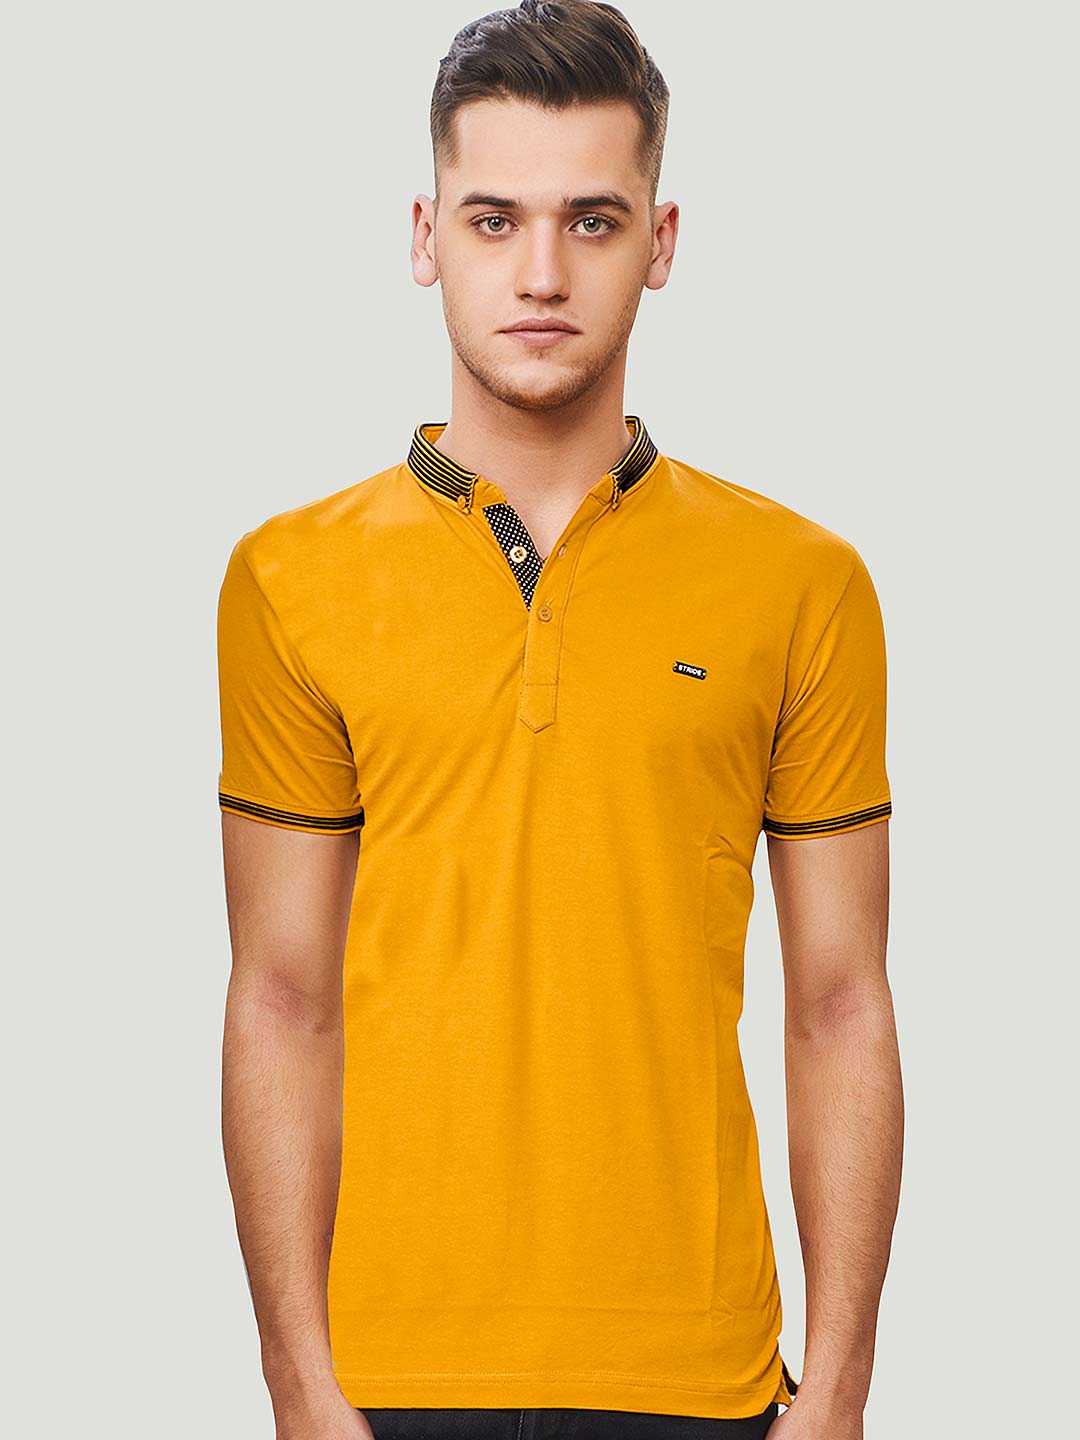 Stride Mustard Yellow Colored Casual T Shirt G3 Mts8919 G3fashion Com